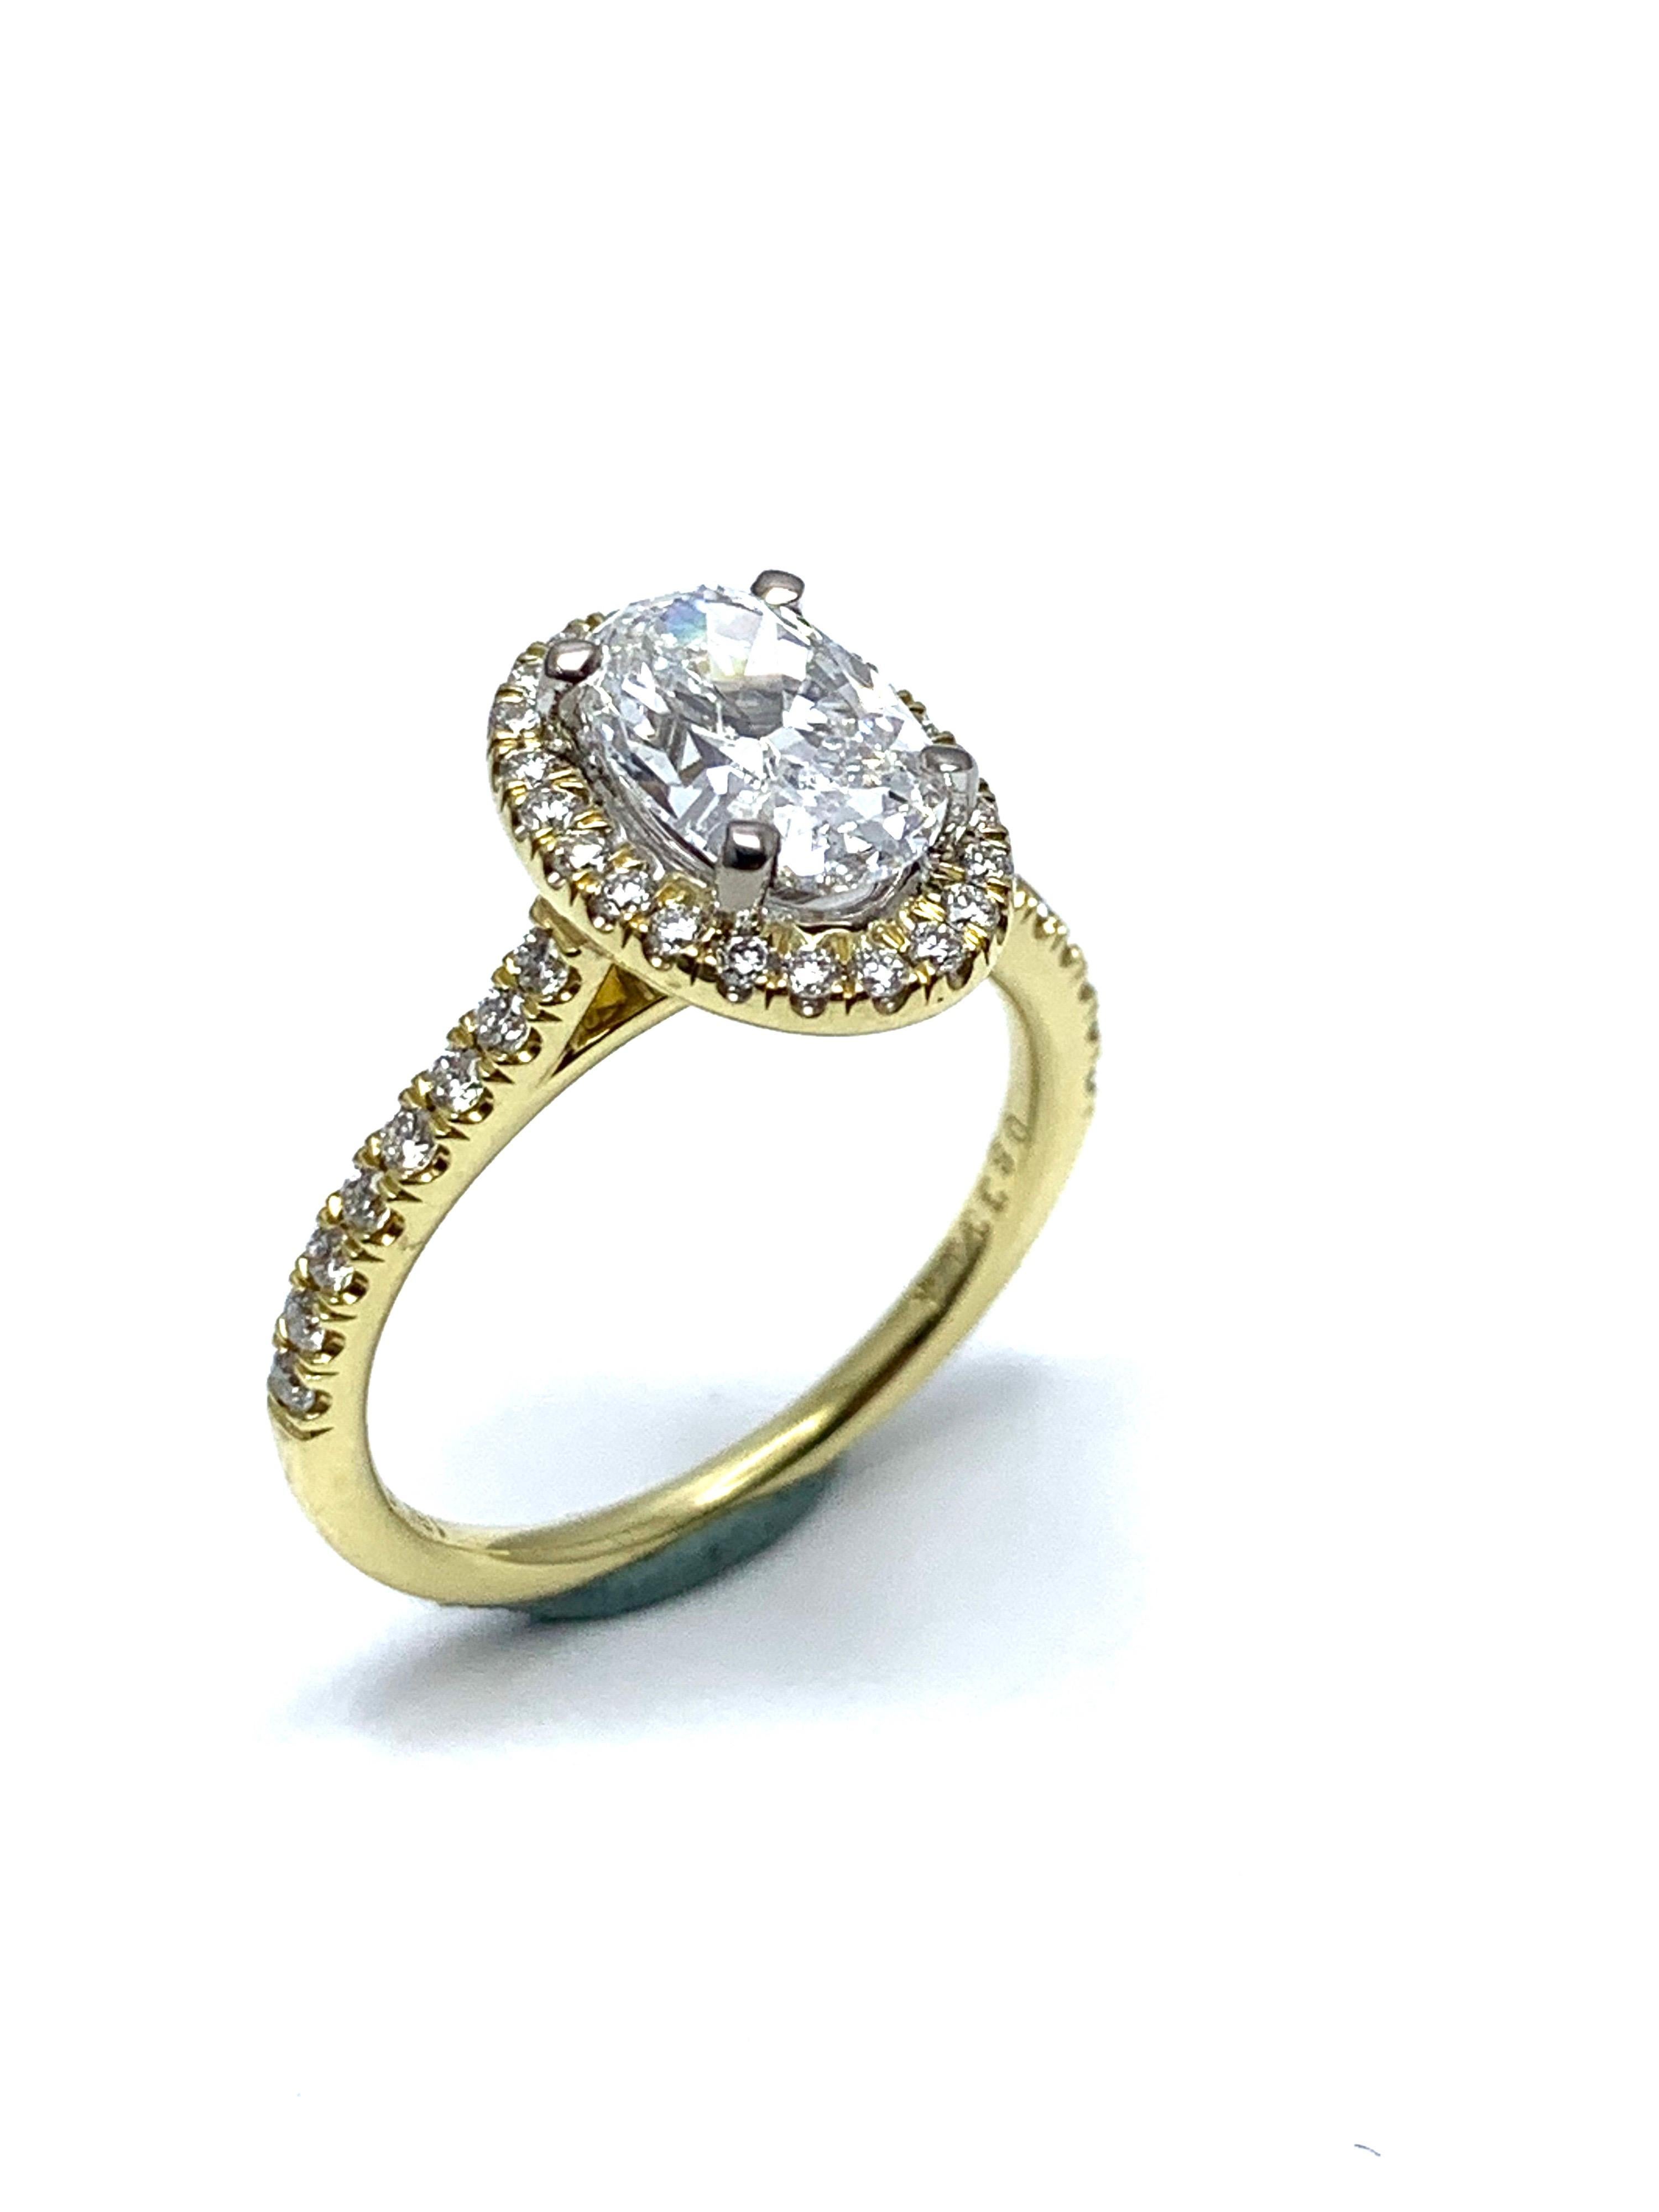 A gorgeous 1.51 carat oval brilliant Diamond 18 karat yellow gold ring.  The oval brilliant Diamond is set in four prongs atop a single row of round brilliant Diamonds surrounding, and a Diamond half shank.  The oval Diamond is garded by GIA report